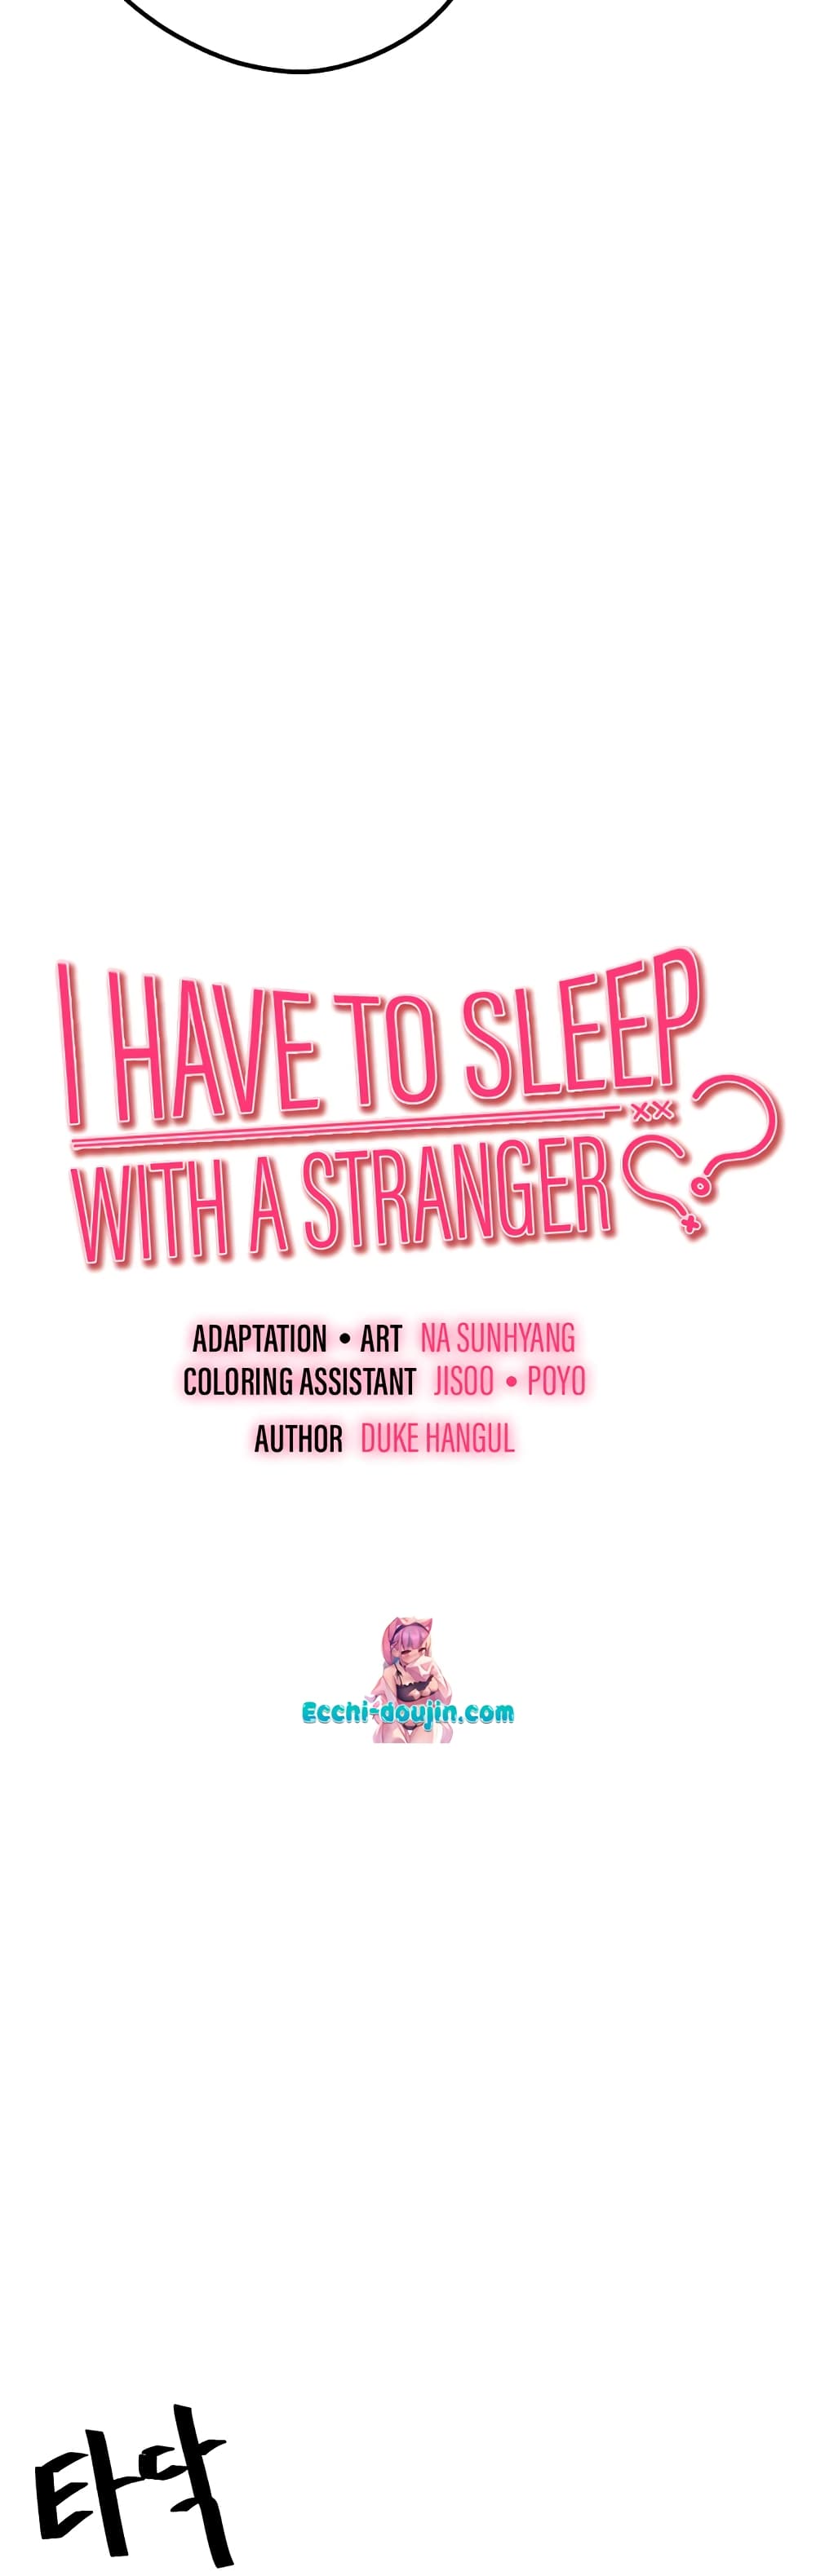 I Have To Sleep With A Stranger 1-1